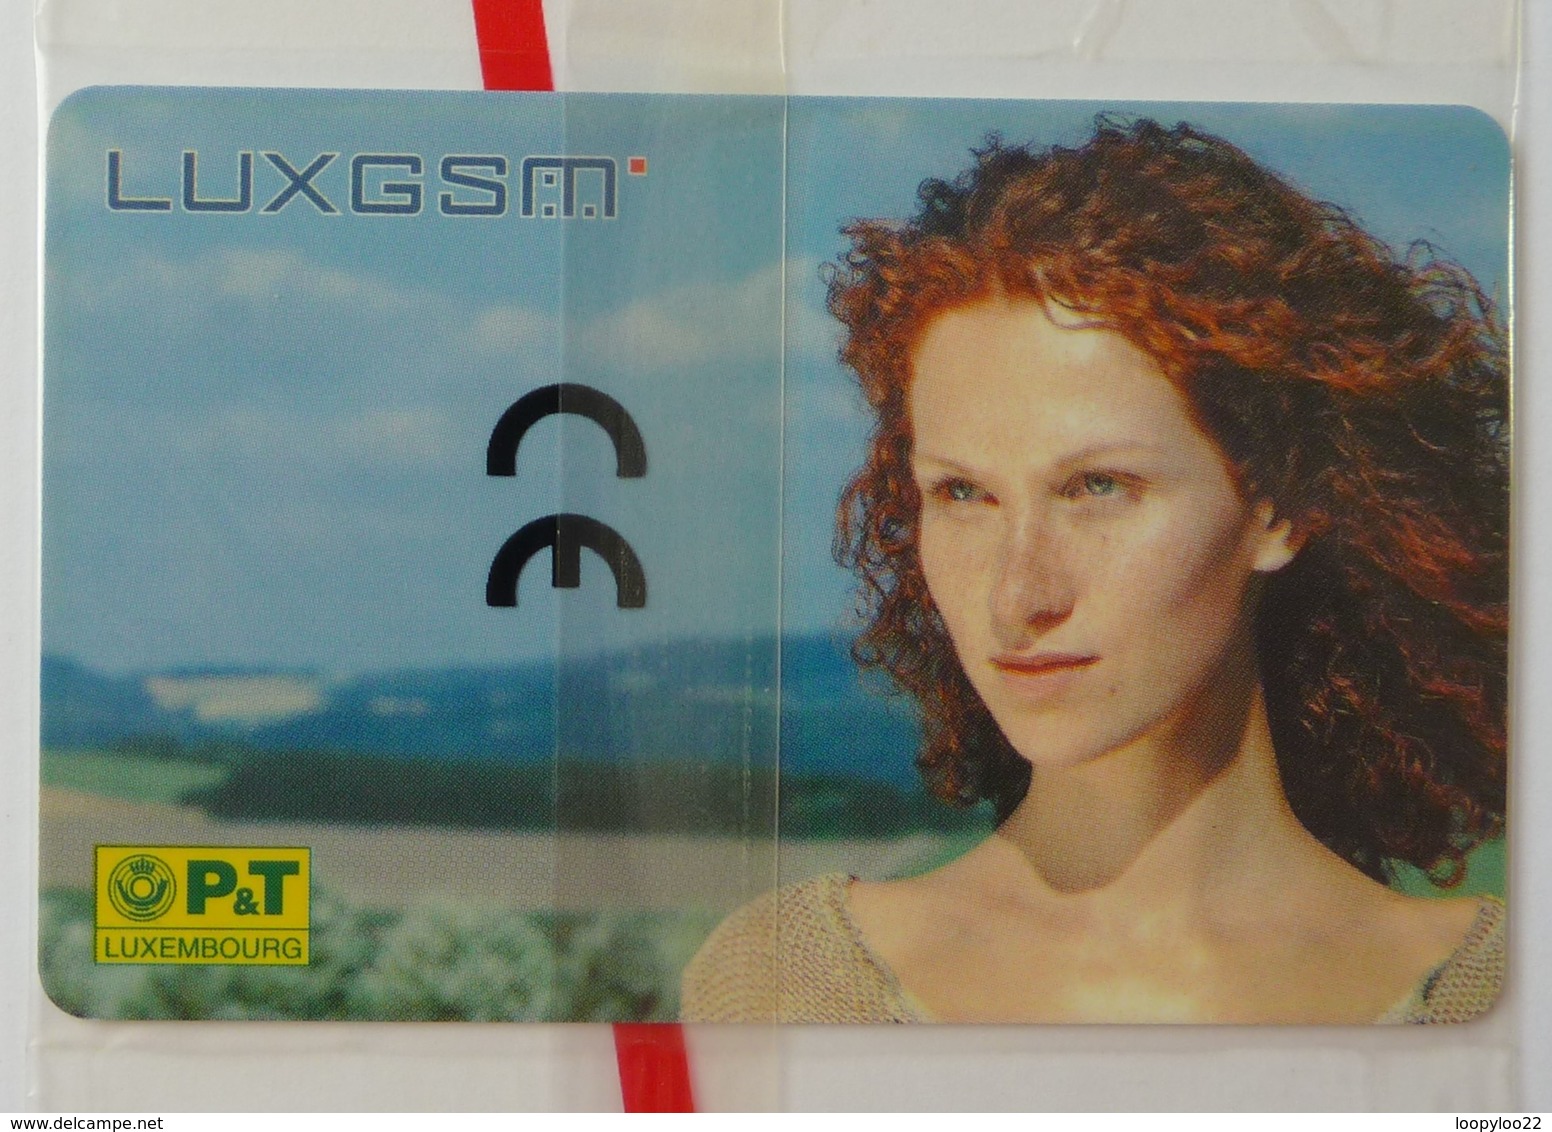 LUXEMBOURG - LUX GSM - TP23  - 04/01 - Mint Blister - Luxemburg